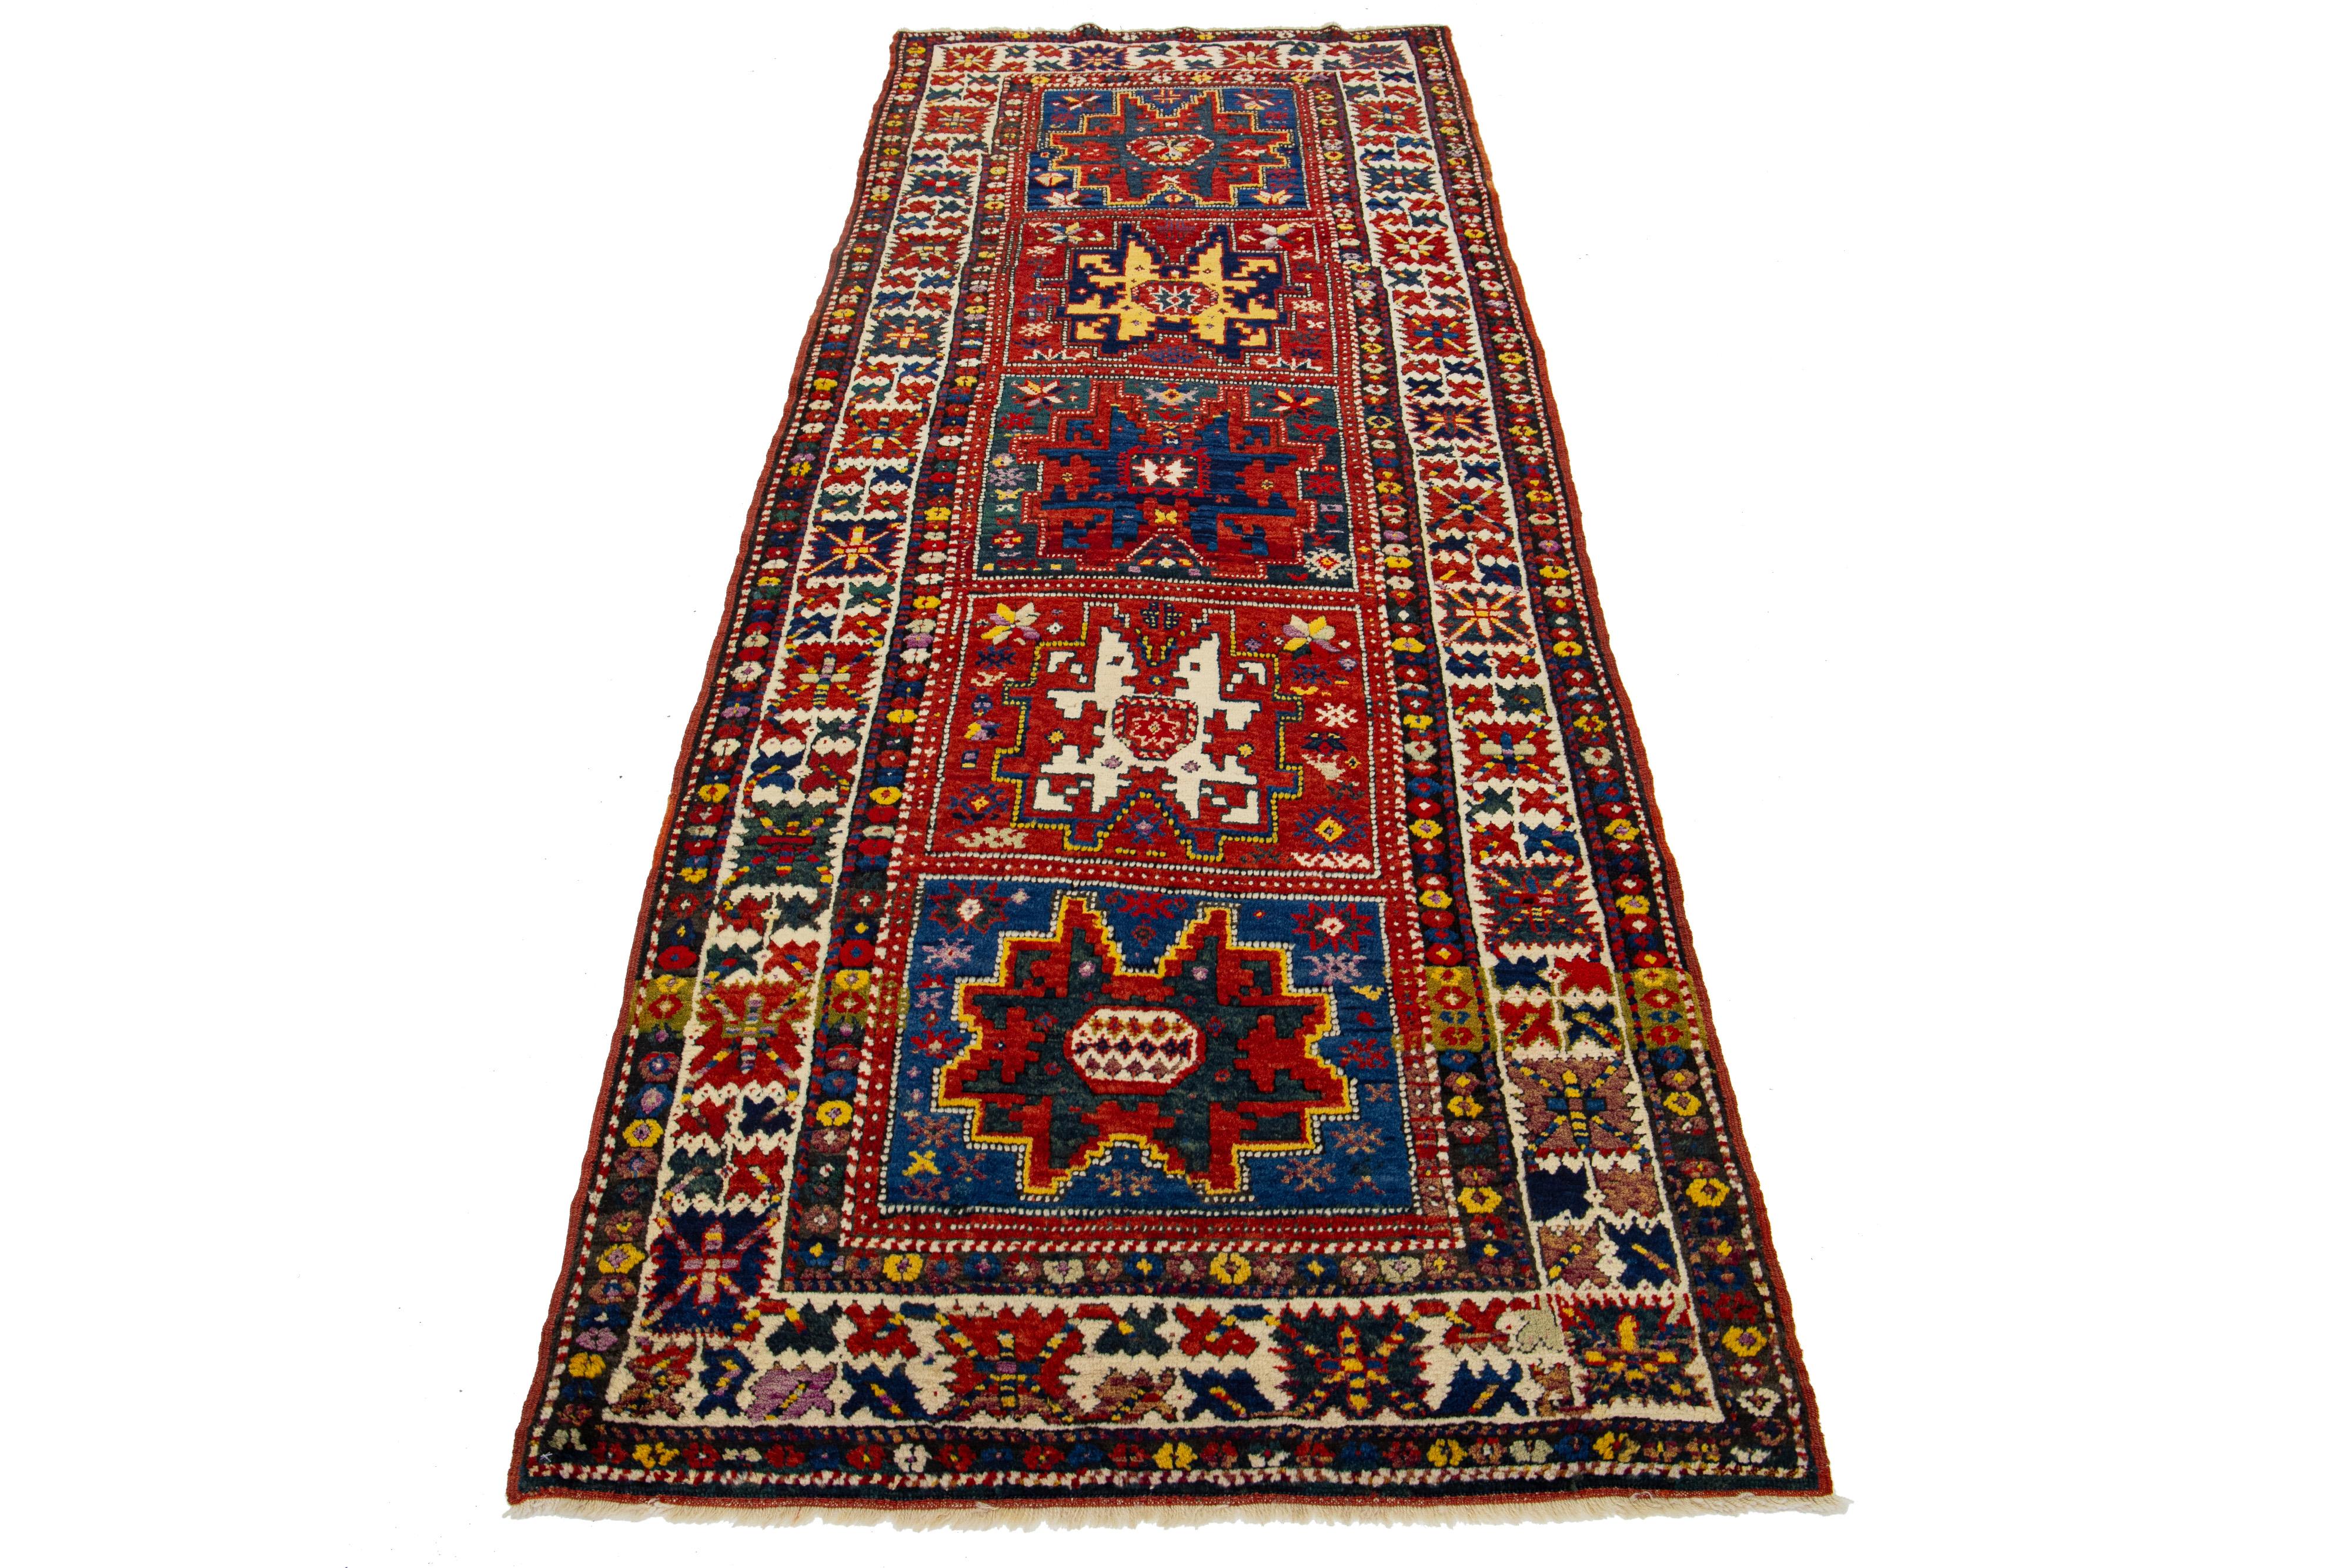 Beautiful 1900s Kazak hand-knotted wool rug with a red color field. This piece has multicolor accents in an all-over Tribal motif.

This rug measures 3'7